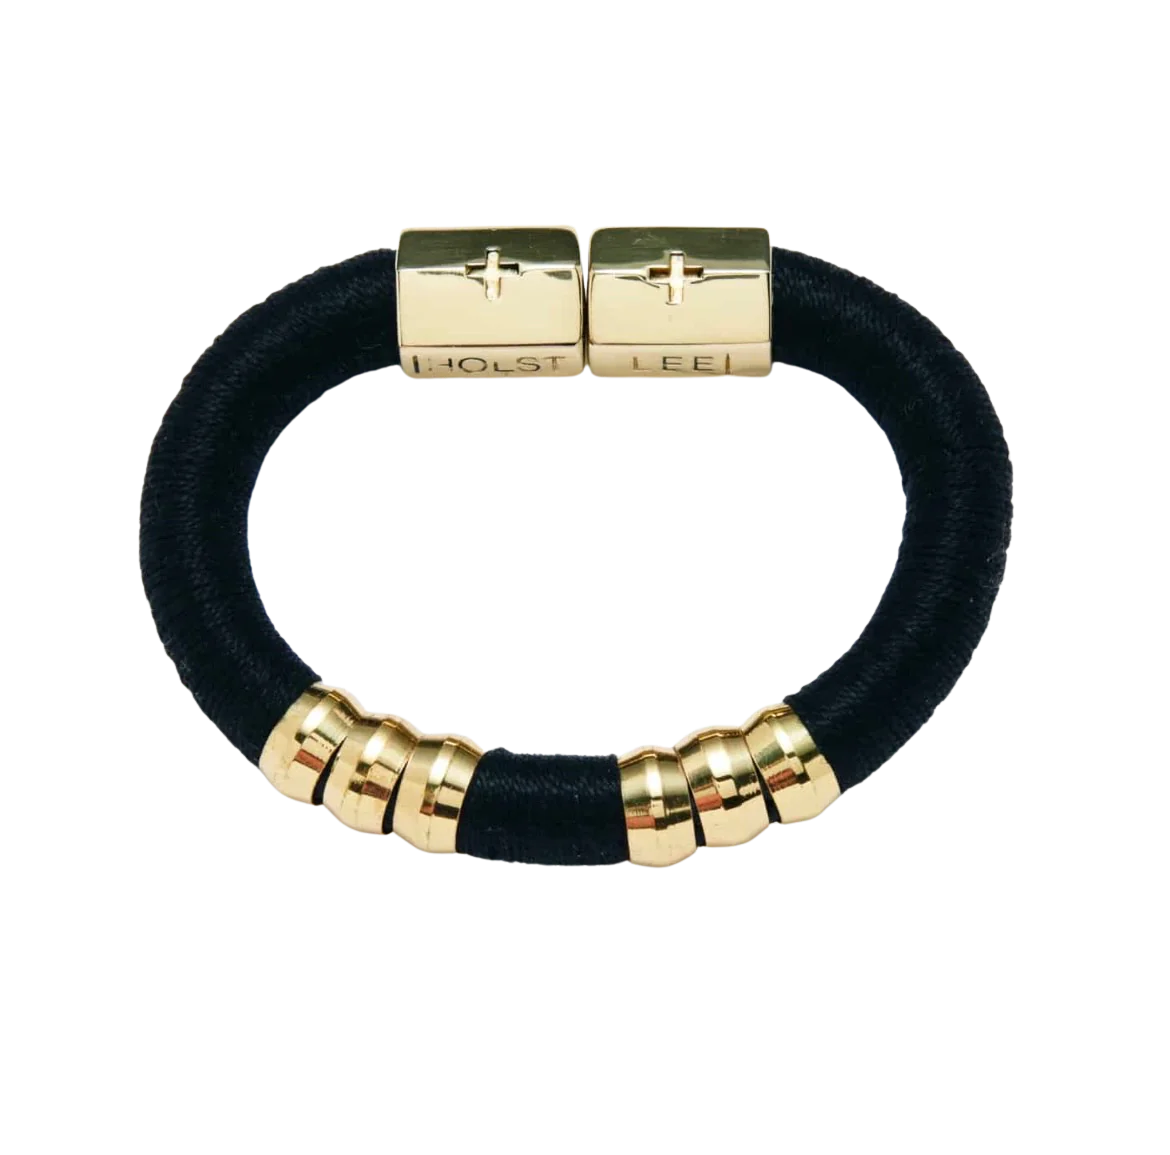 Holst+Lee Classic Bracelet in Black and Tan